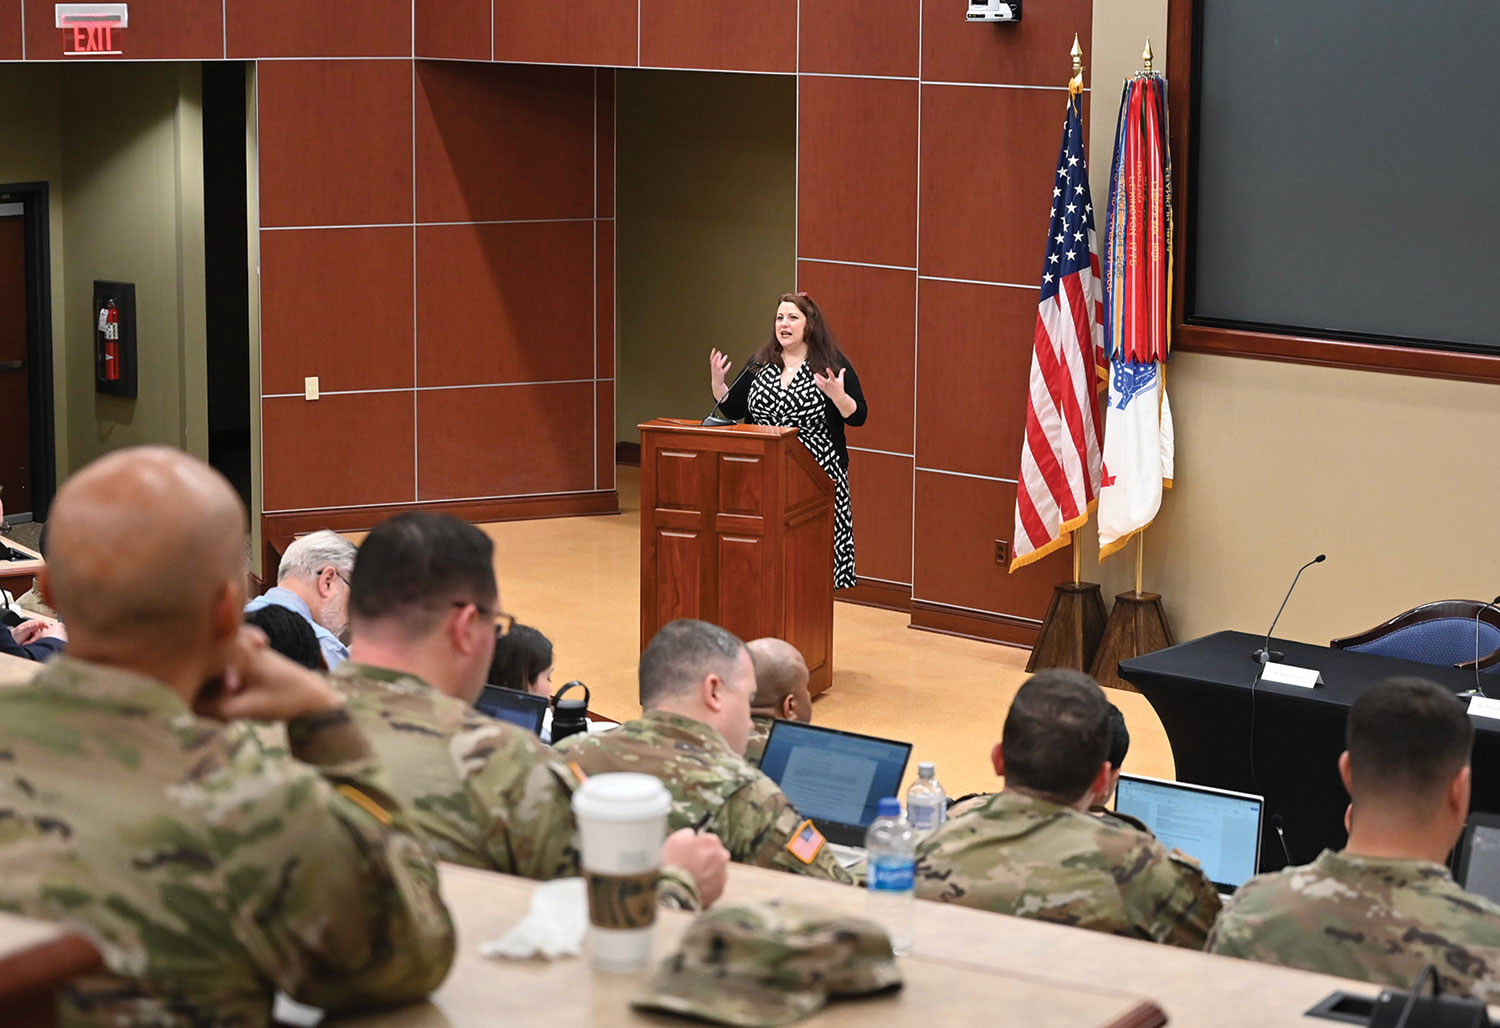 Dr. Shannon E. French, the CGSC Foundation's General Hugh Shelton Distinguished Visiting Chair of Ethics, provide keynote remarks for the 2023 CGSC Military Ethics Symposium on April 20, 2023, in the Marshall Auditorium of the Lewis and Clark Center on Fort Leavenworth.